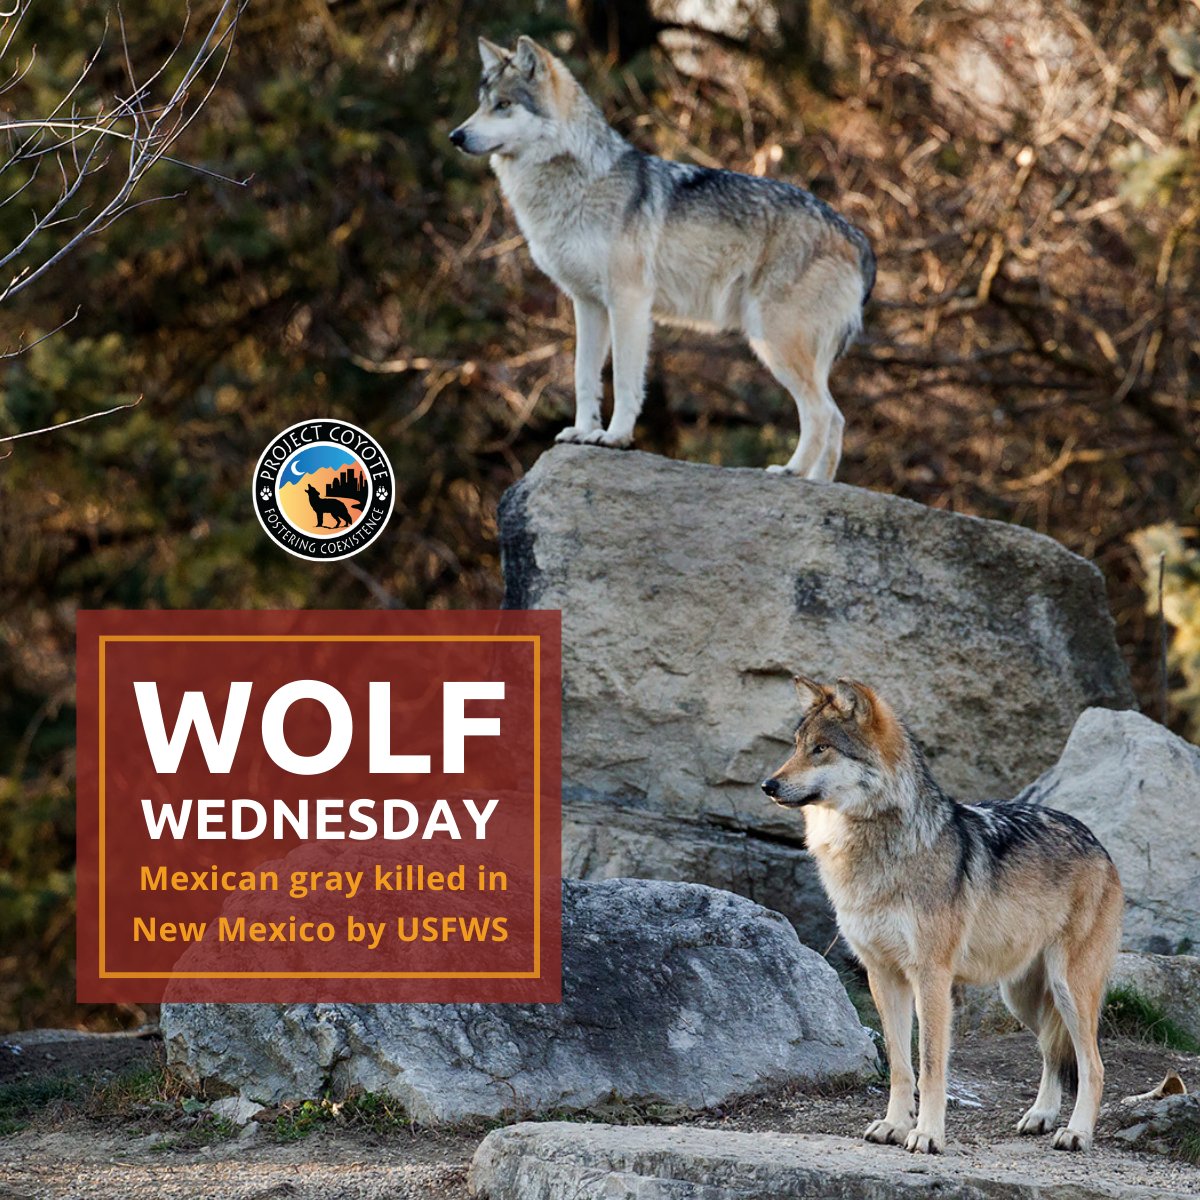 An endangered Mexican gray wolf has been killed in New Mexico by federal employees, according to a document released by the @USFWS. tinyurl.com/yc7amfmh

#WolfWednesday #MexicanGrayWolf #ProtectAmericasWolves 

📷 Monty Sloan